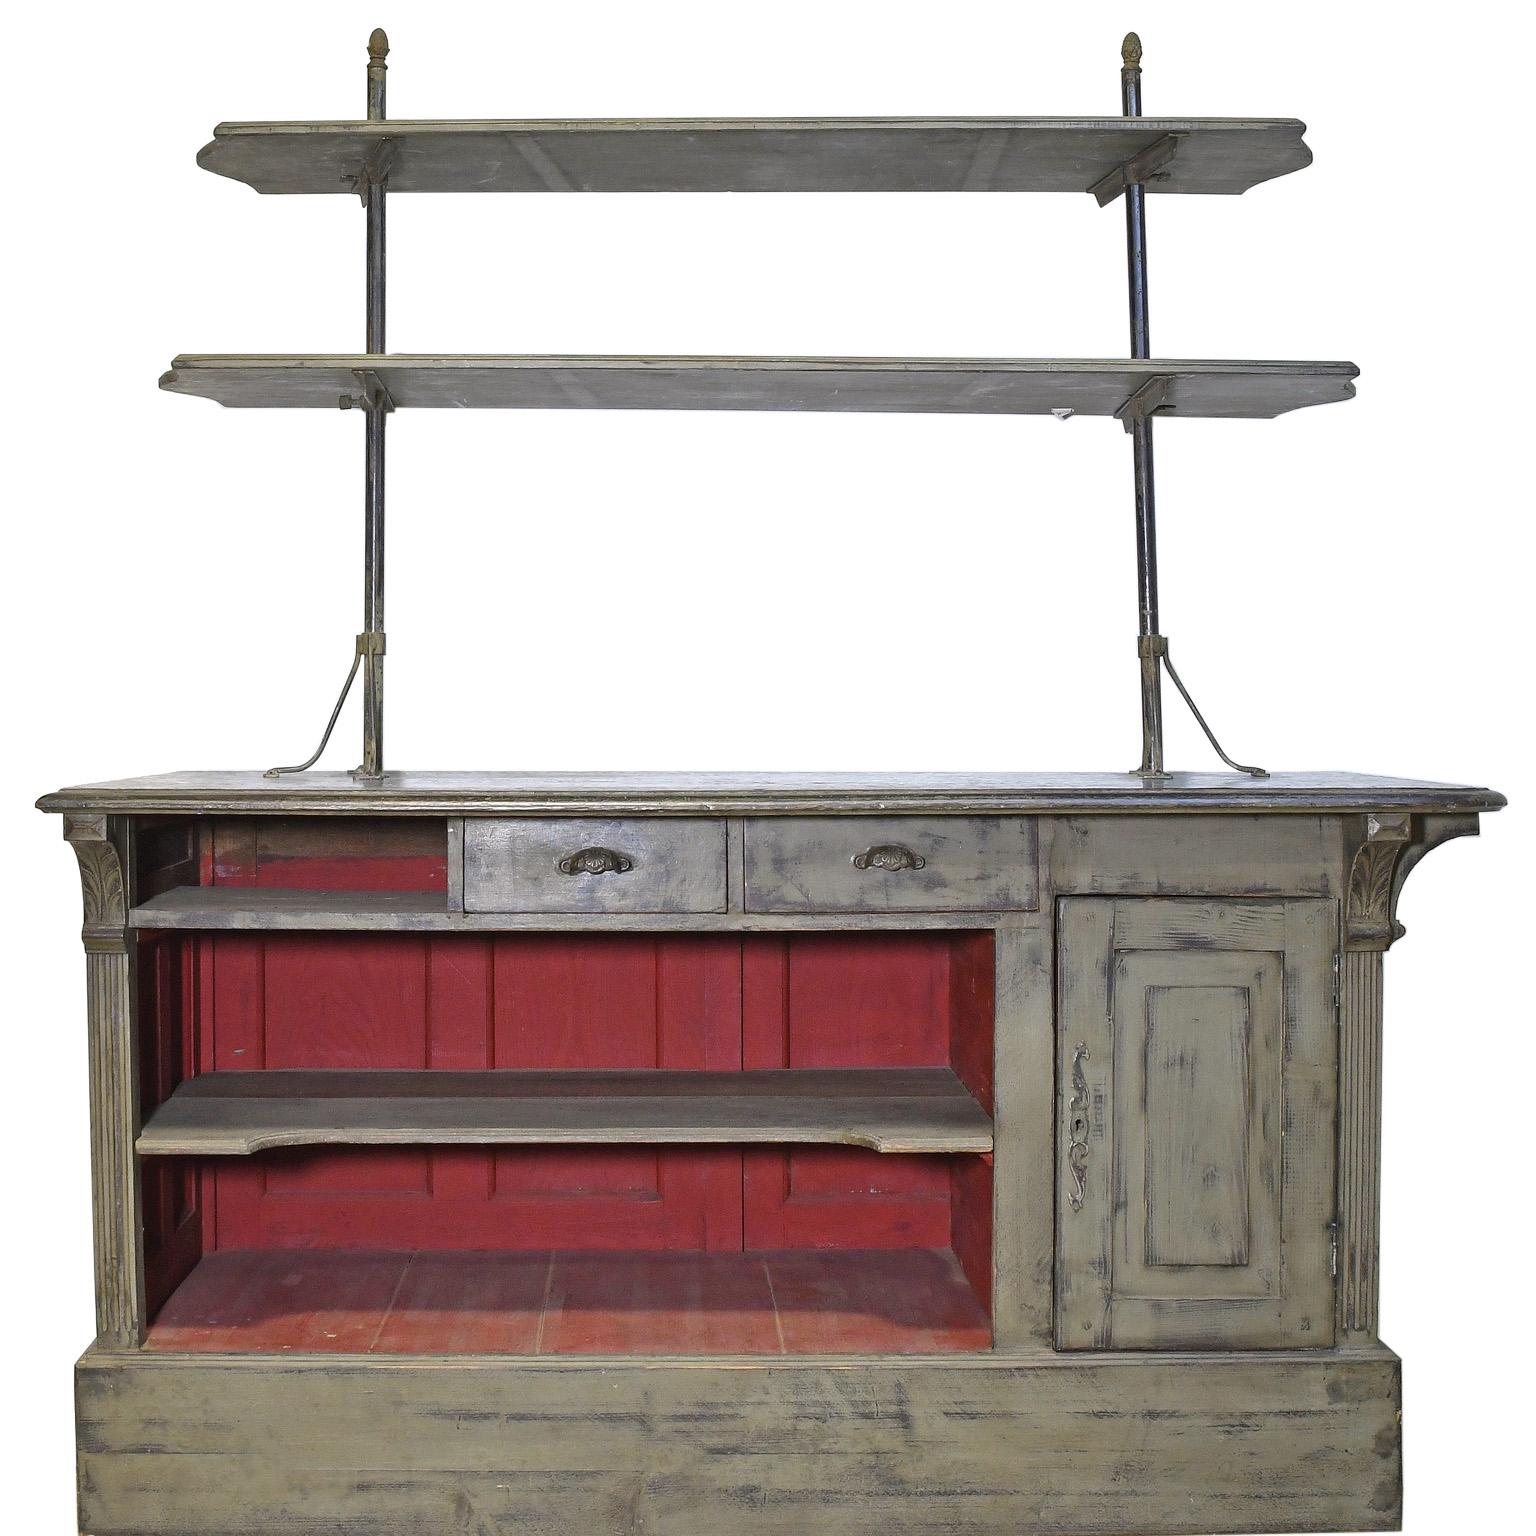 An unusual and beautiful antique shop counter that may have come from a European bakery, with zinc top and panelled front and sides, with carved acanthus on fluted corner pilasters. Two long, adjustable wooden shelves are supported on metal poles